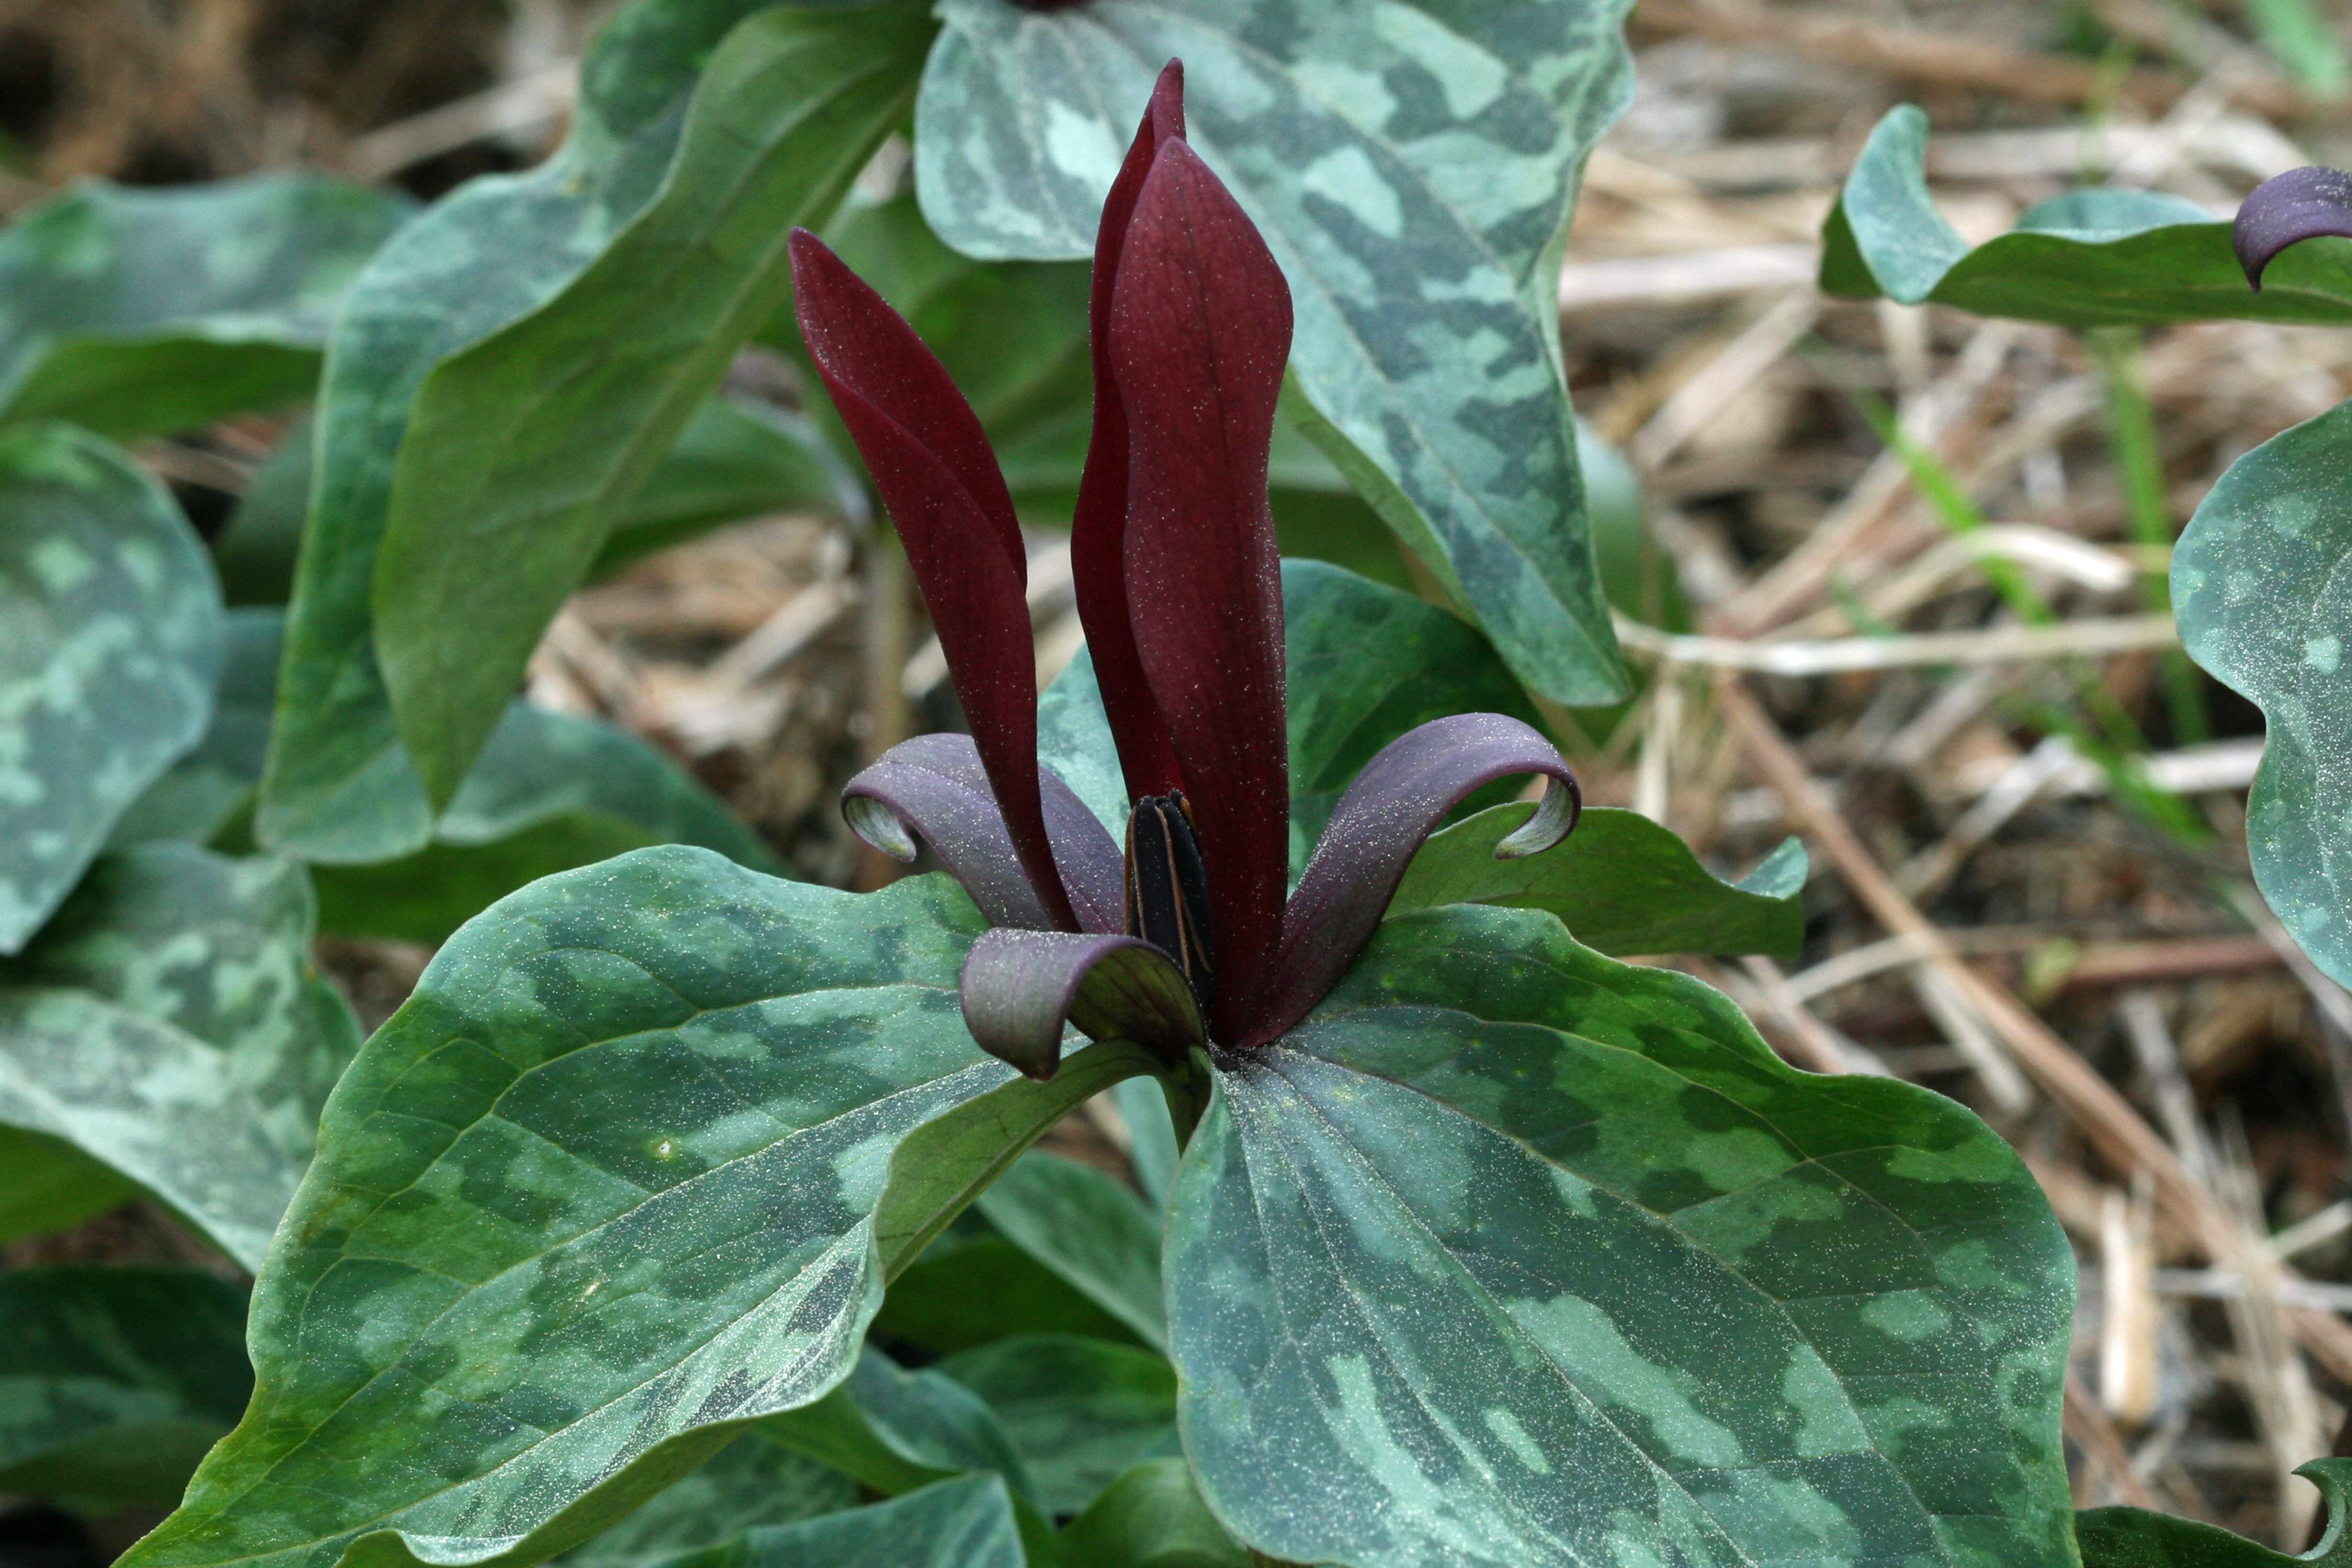 The Scientific Name is Trillium maculatum. You will likely hear them called Mottled Trillium, Spotted Trillium, Spotted Wakerobin. This picture shows the A sessile Trillium with broadly ovate mottled leaves, erect, bright maroon petals, and purple-maroon sepals with reflexed tips. of Trillium maculatum